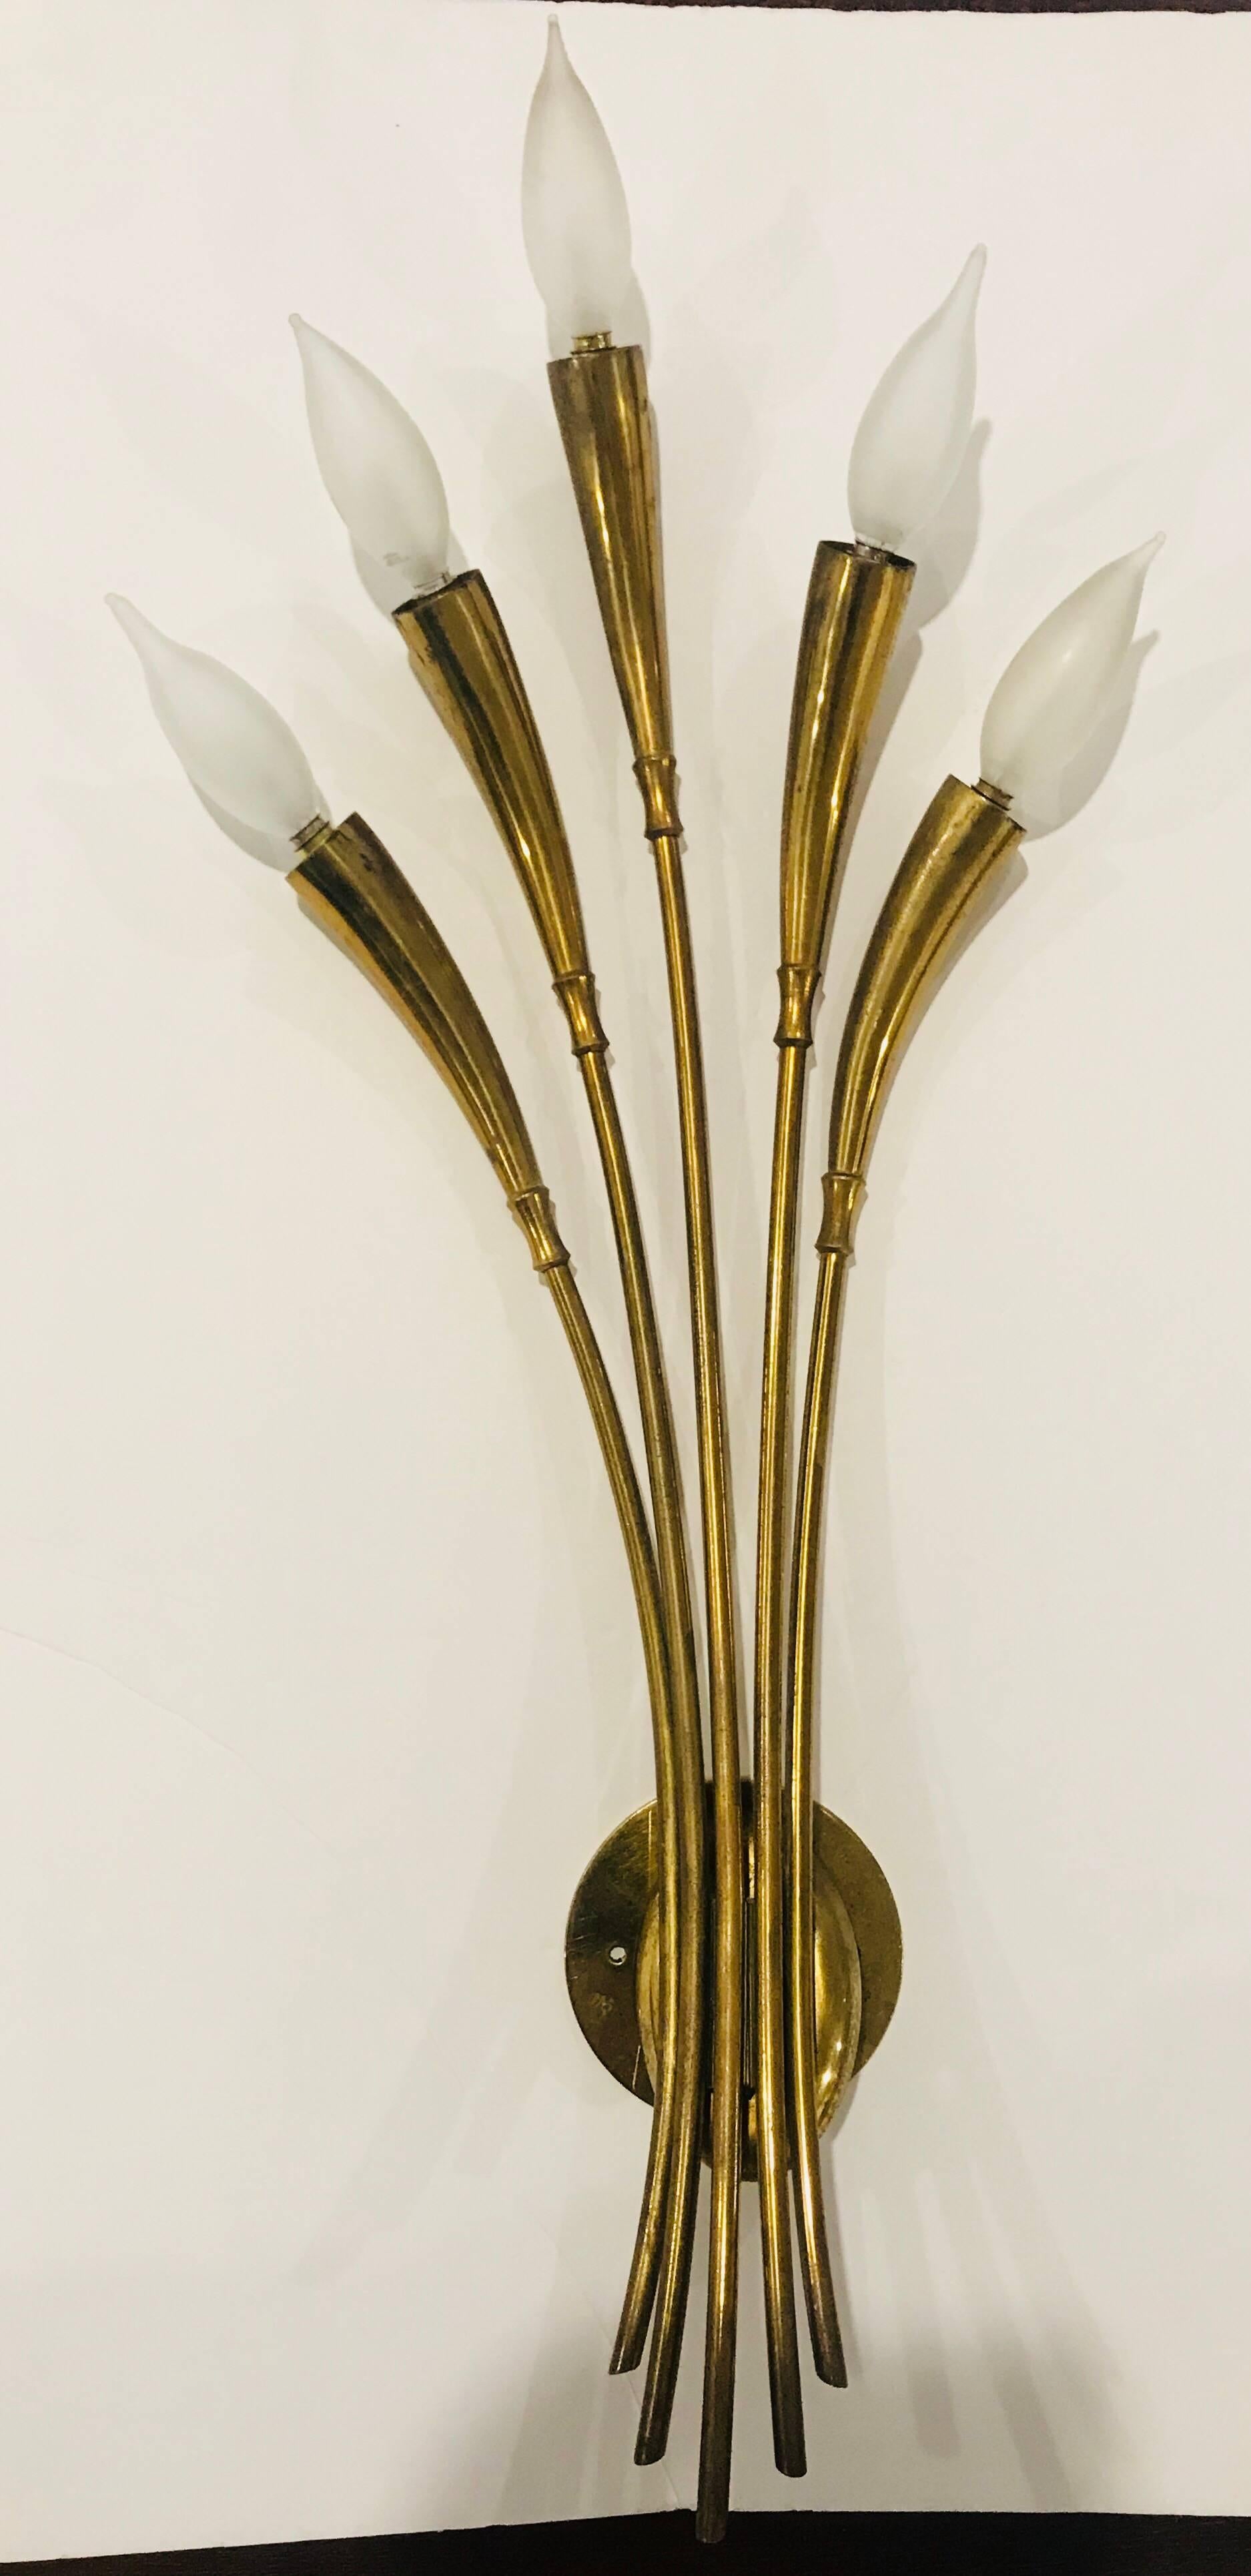 A splendid handcrafted golden brass large five light floral wall light by the famed Italian lighting company, Lumi. Newly rewired with matching backplate.